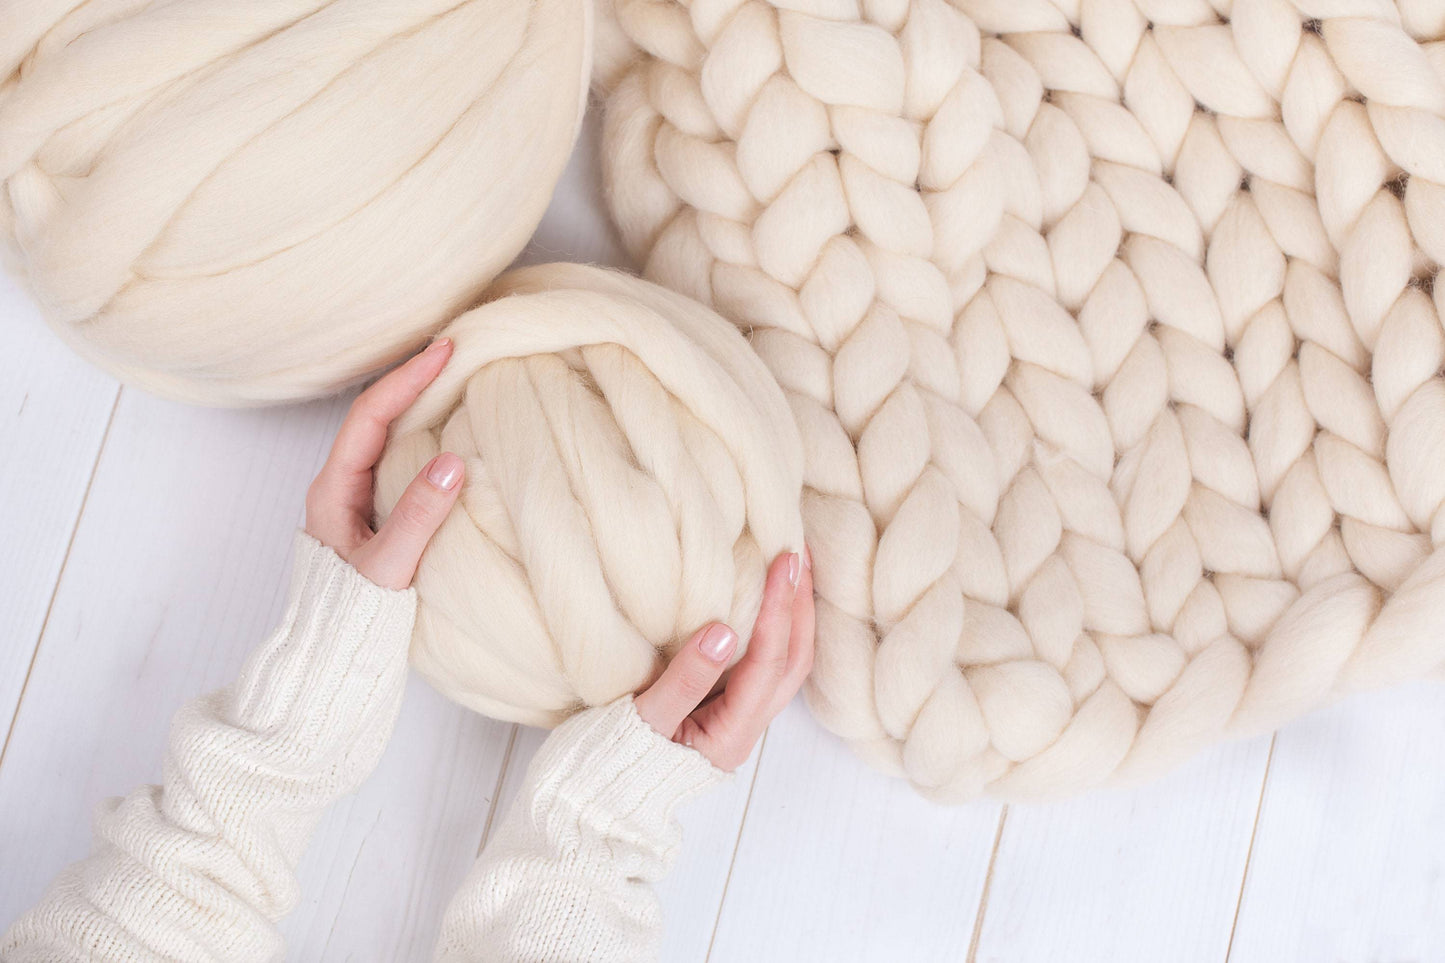 Any good use for those giant chunky yarn/roving knit blankets? : r